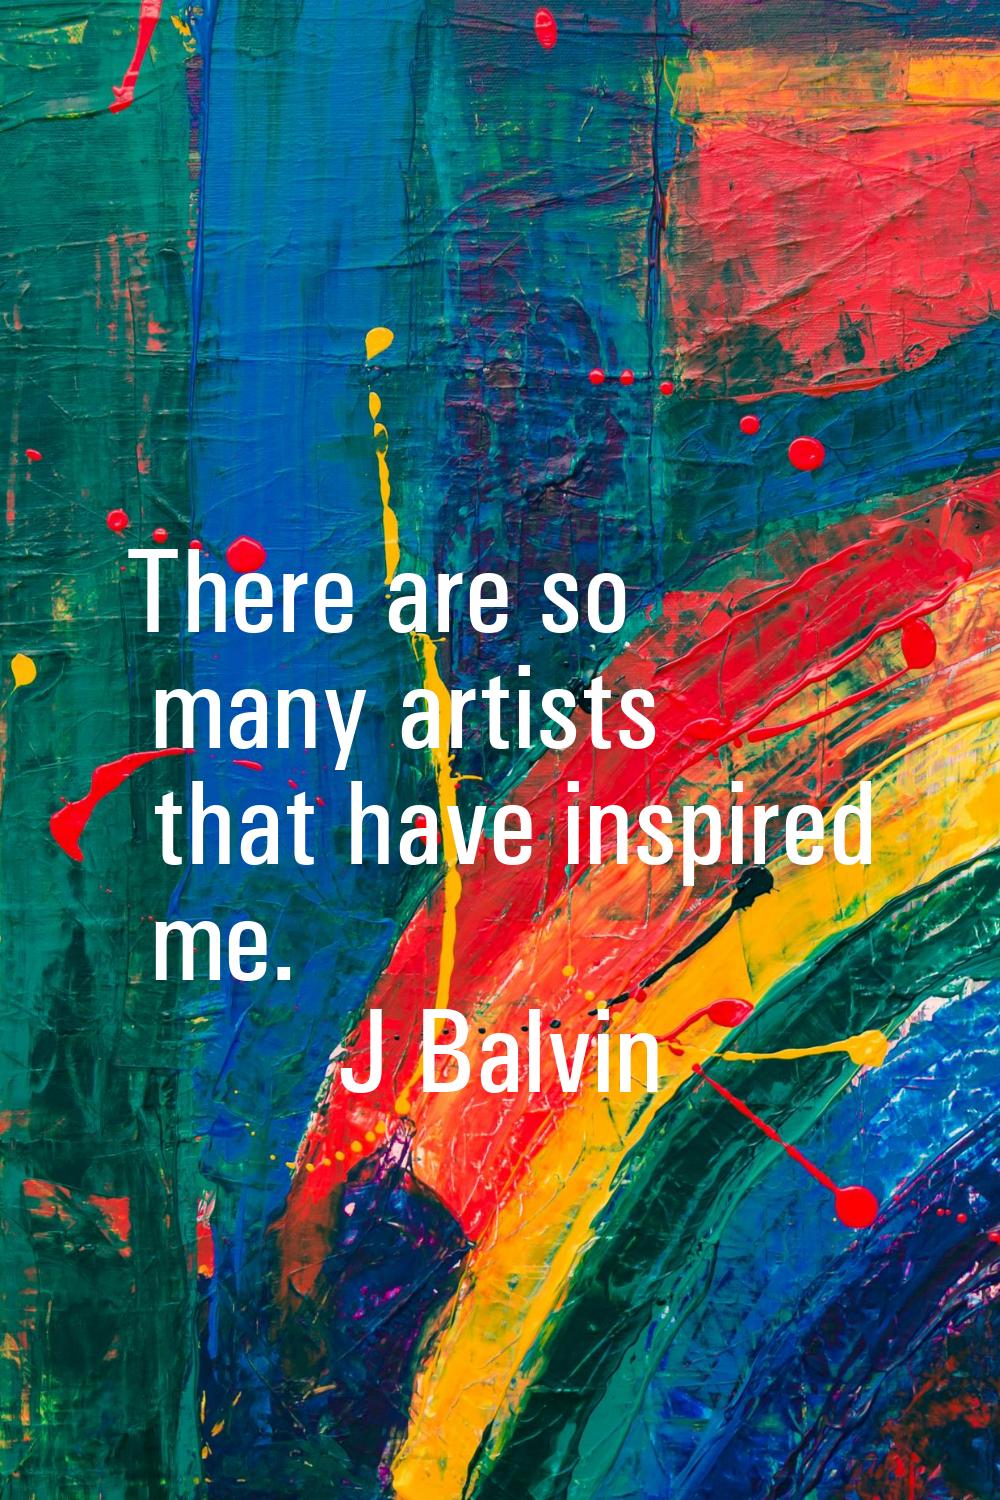 There are so many artists that have inspired me.